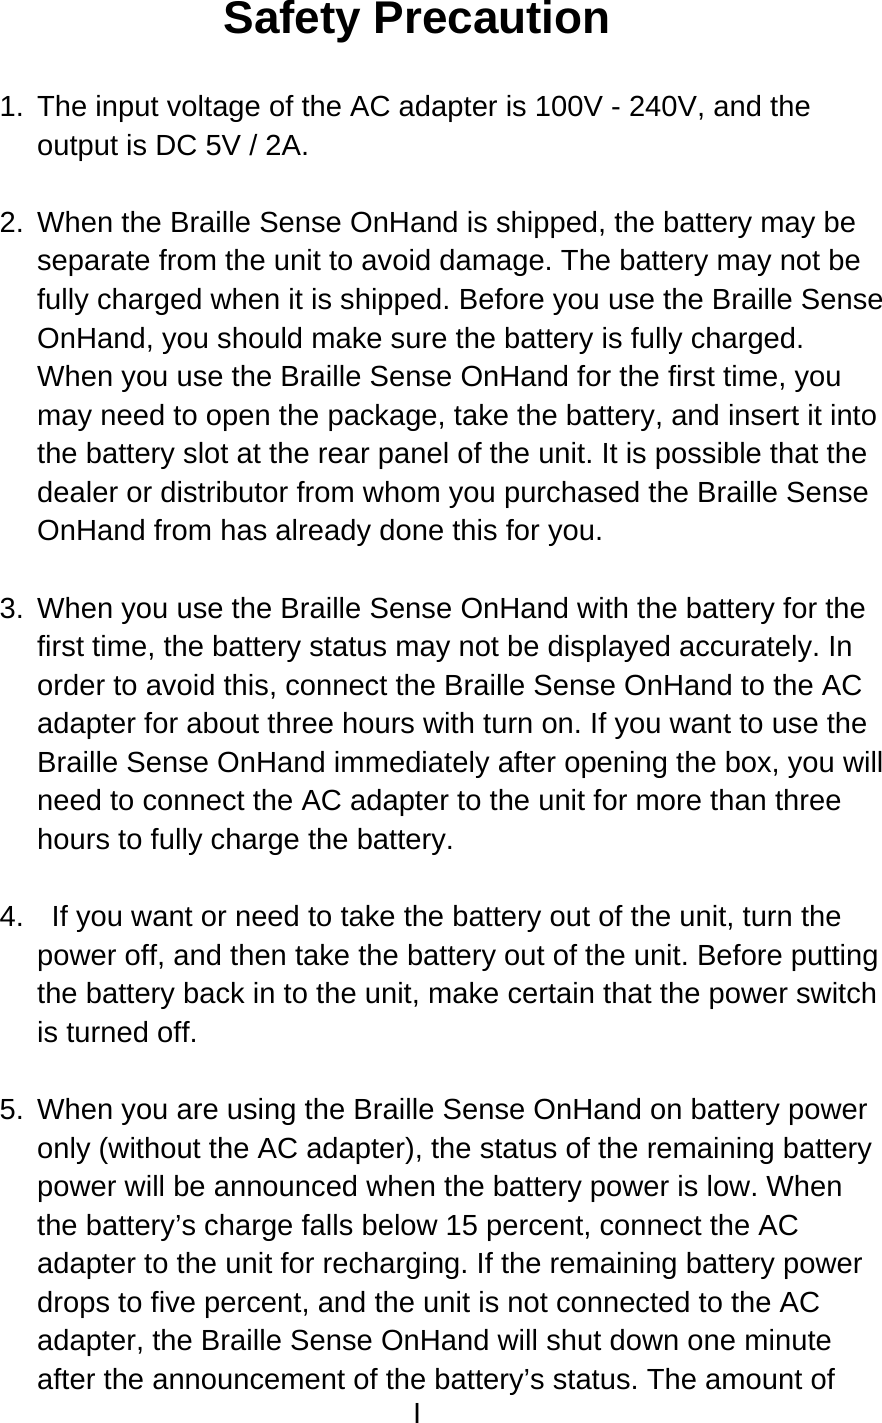 I  Safety Precaution  1.  The input voltage of the AC adapter is 100V - 240V, and the output is DC 5V / 2A.  2.  When the Braille Sense OnHand is shipped, the battery may be separate from the unit to avoid damage. The battery may not be fully charged when it is shipped. Before you use the Braille Sense OnHand, you should make sure the battery is fully charged. When you use the Braille Sense OnHand for the first time, you may need to open the package, take the battery, and insert it into the battery slot at the rear panel of the unit. It is possible that the dealer or distributor from whom you purchased the Braille Sense OnHand from has already done this for you.  3.  When you use the Braille Sense OnHand with the battery for the first time, the battery status may not be displayed accurately. In order to avoid this, connect the Braille Sense OnHand to the AC adapter for about three hours with turn on. If you want to use the Braille Sense OnHand immediately after opening the box, you will need to connect the AC adapter to the unit for more than three hours to fully charge the battery.  4.    If you want or need to take the battery out of the unit, turn the power off, and then take the battery out of the unit. Before putting the battery back in to the unit, make certain that the power switch is turned off.  5.  When you are using the Braille Sense OnHand on battery power only (without the AC adapter), the status of the remaining battery power will be announced when the battery power is low. When the battery’s charge falls below 15 percent, connect the AC adapter to the unit for recharging. If the remaining battery power drops to five percent, and the unit is not connected to the AC adapter, the Braille Sense OnHand will shut down one minute after the announcement of the battery’s status. The amount of 